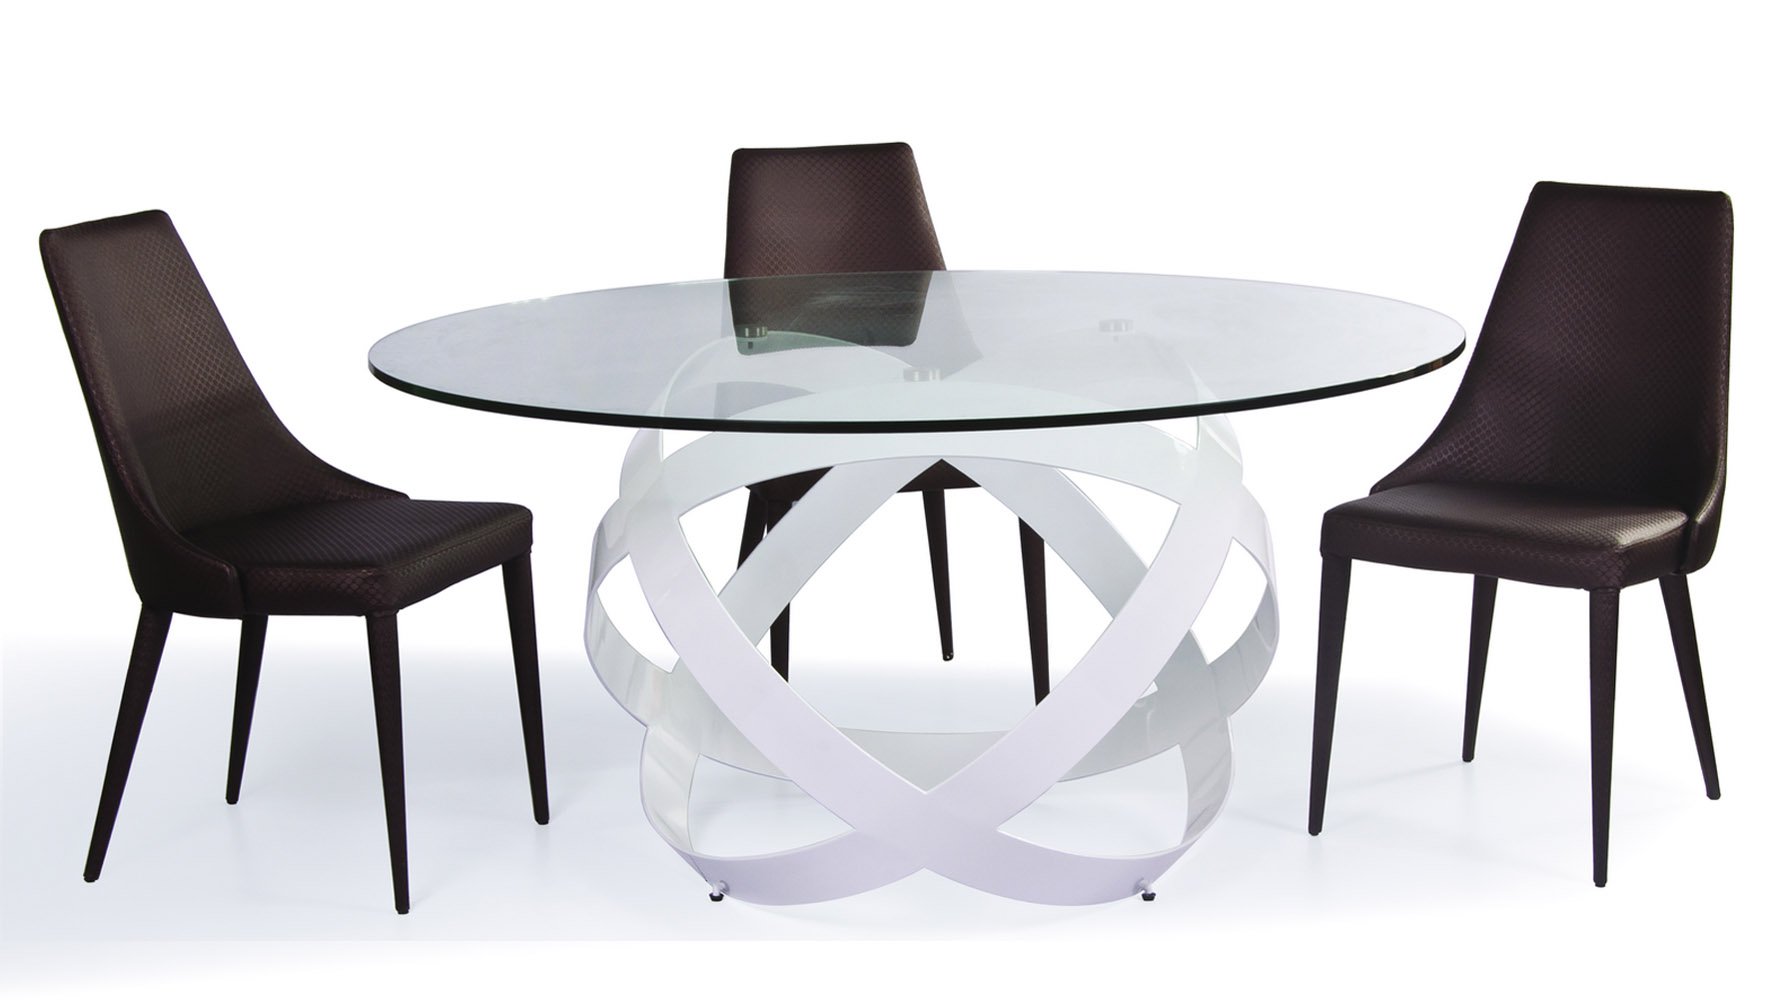 contemporary dining chairs dining room furniture, dining room tables, kitchen tables, dining chairs, OFKGWWV